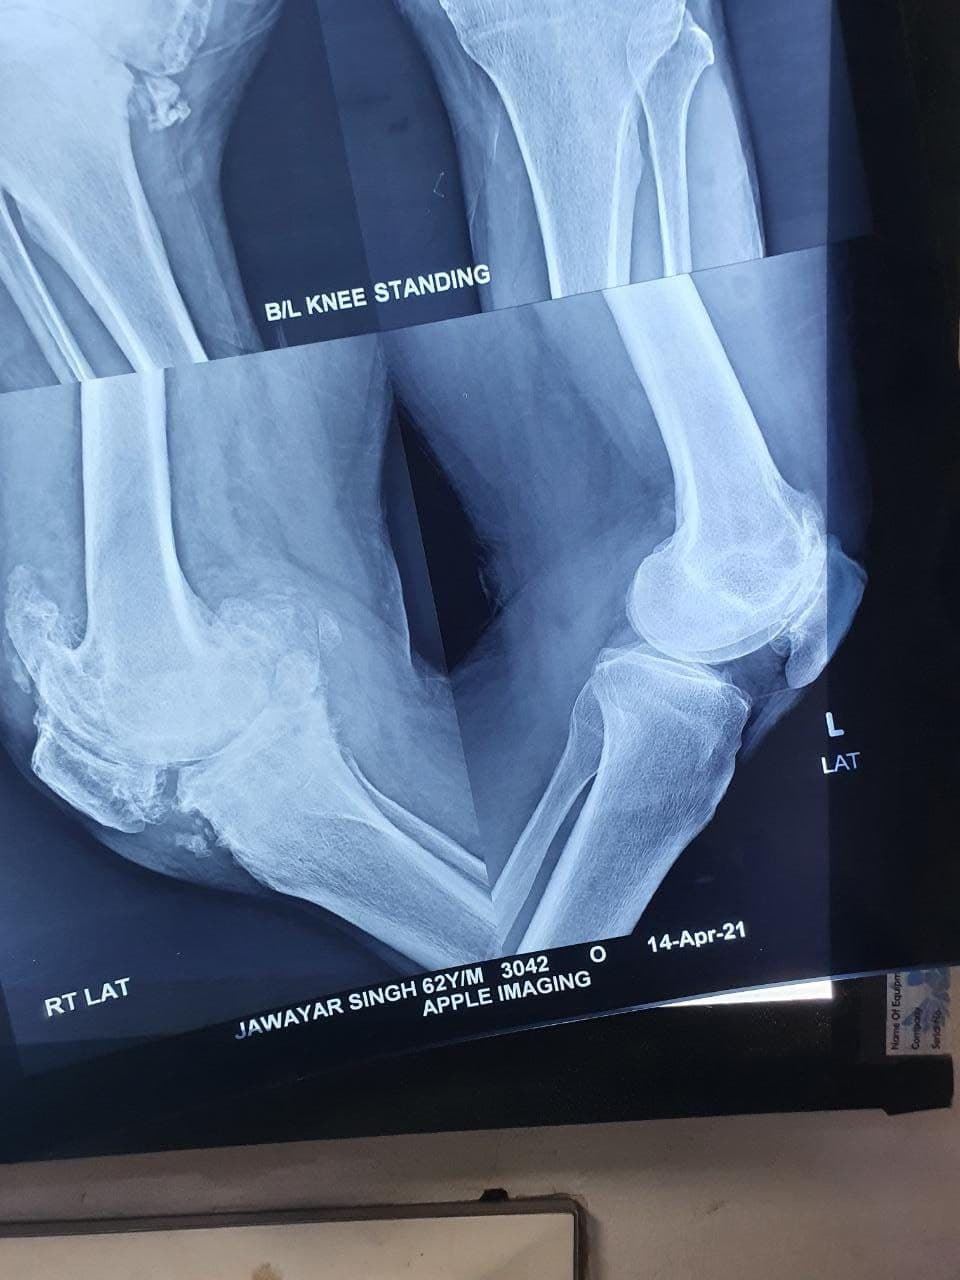 62 Years Male With Severe Osteoarthritis Total Knee Replacement1